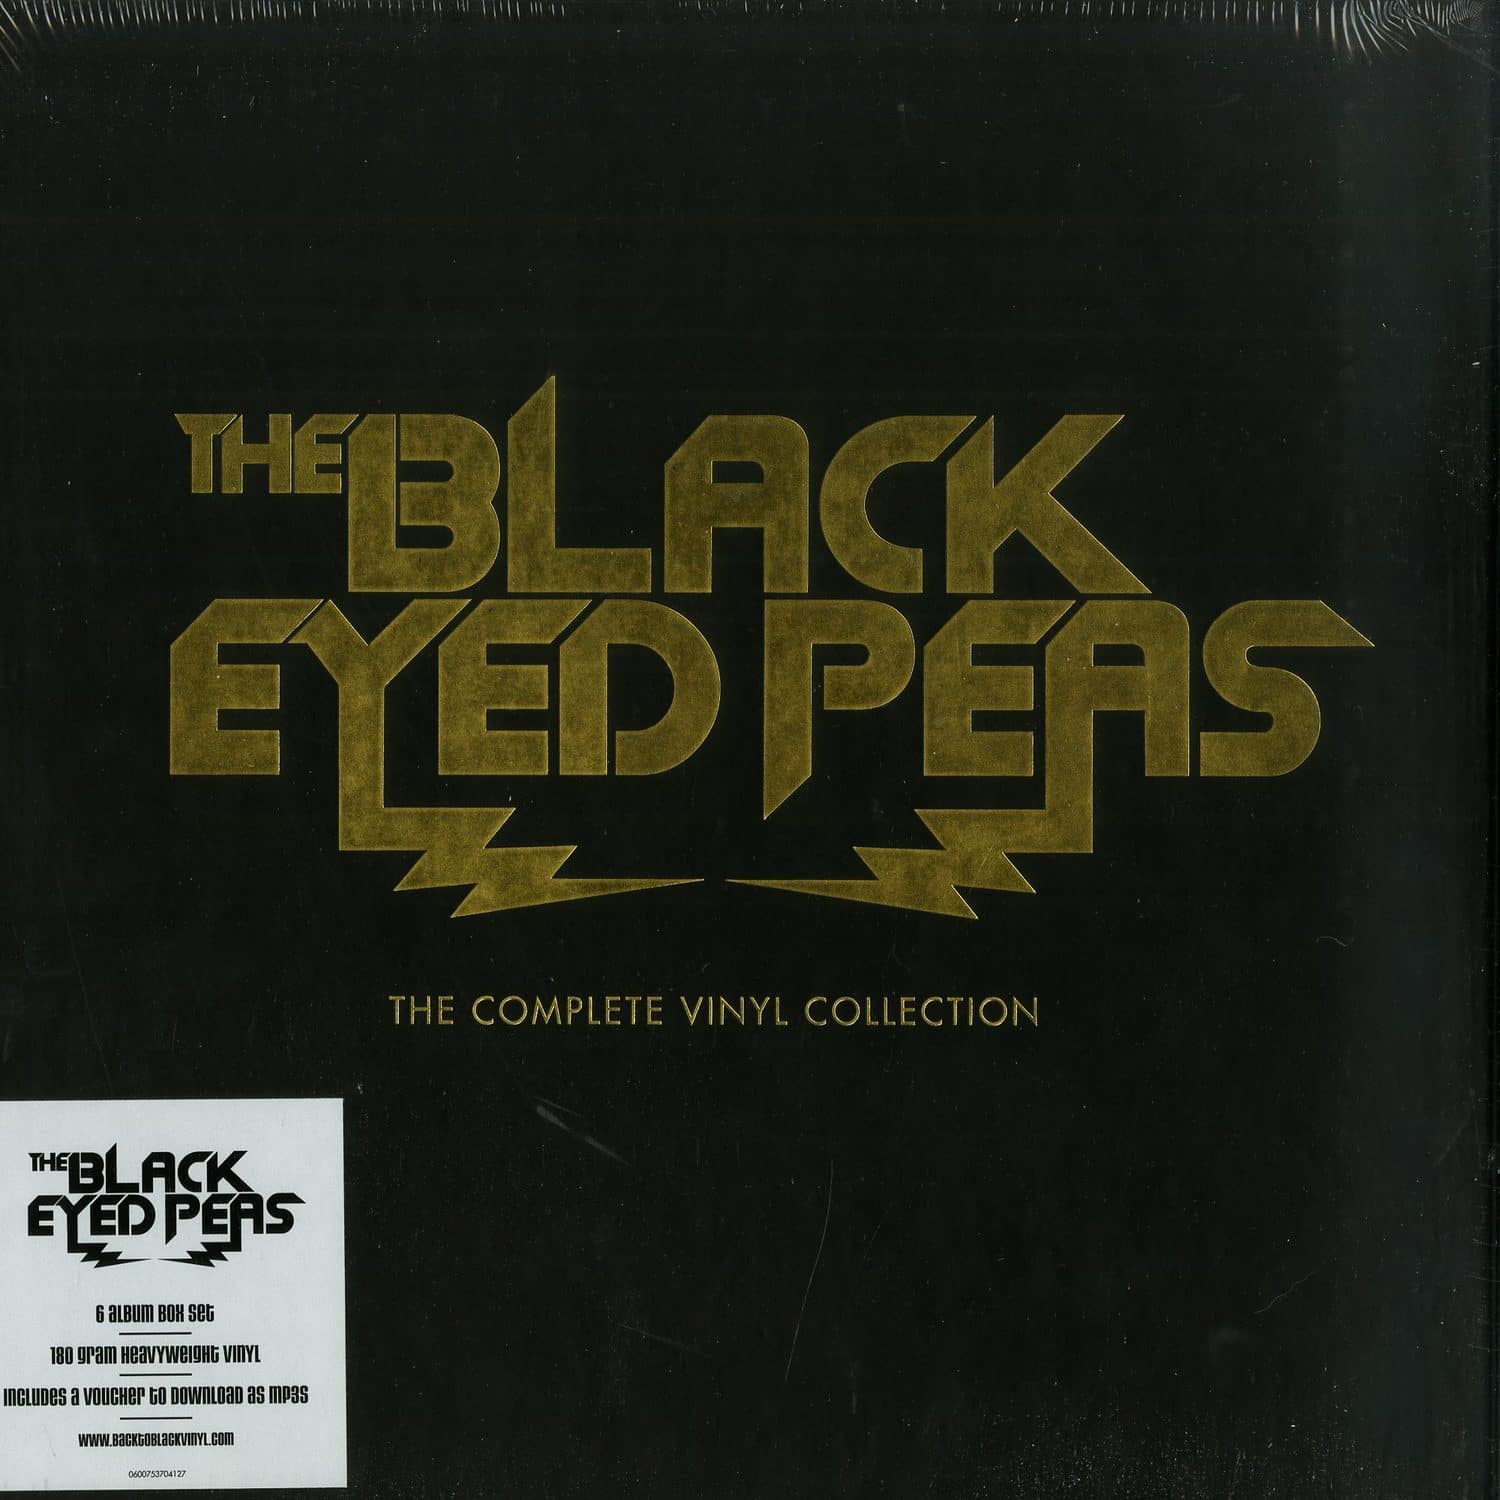 The Black Eyed Peas - THE COMPLETE VINYL COLLECTION 